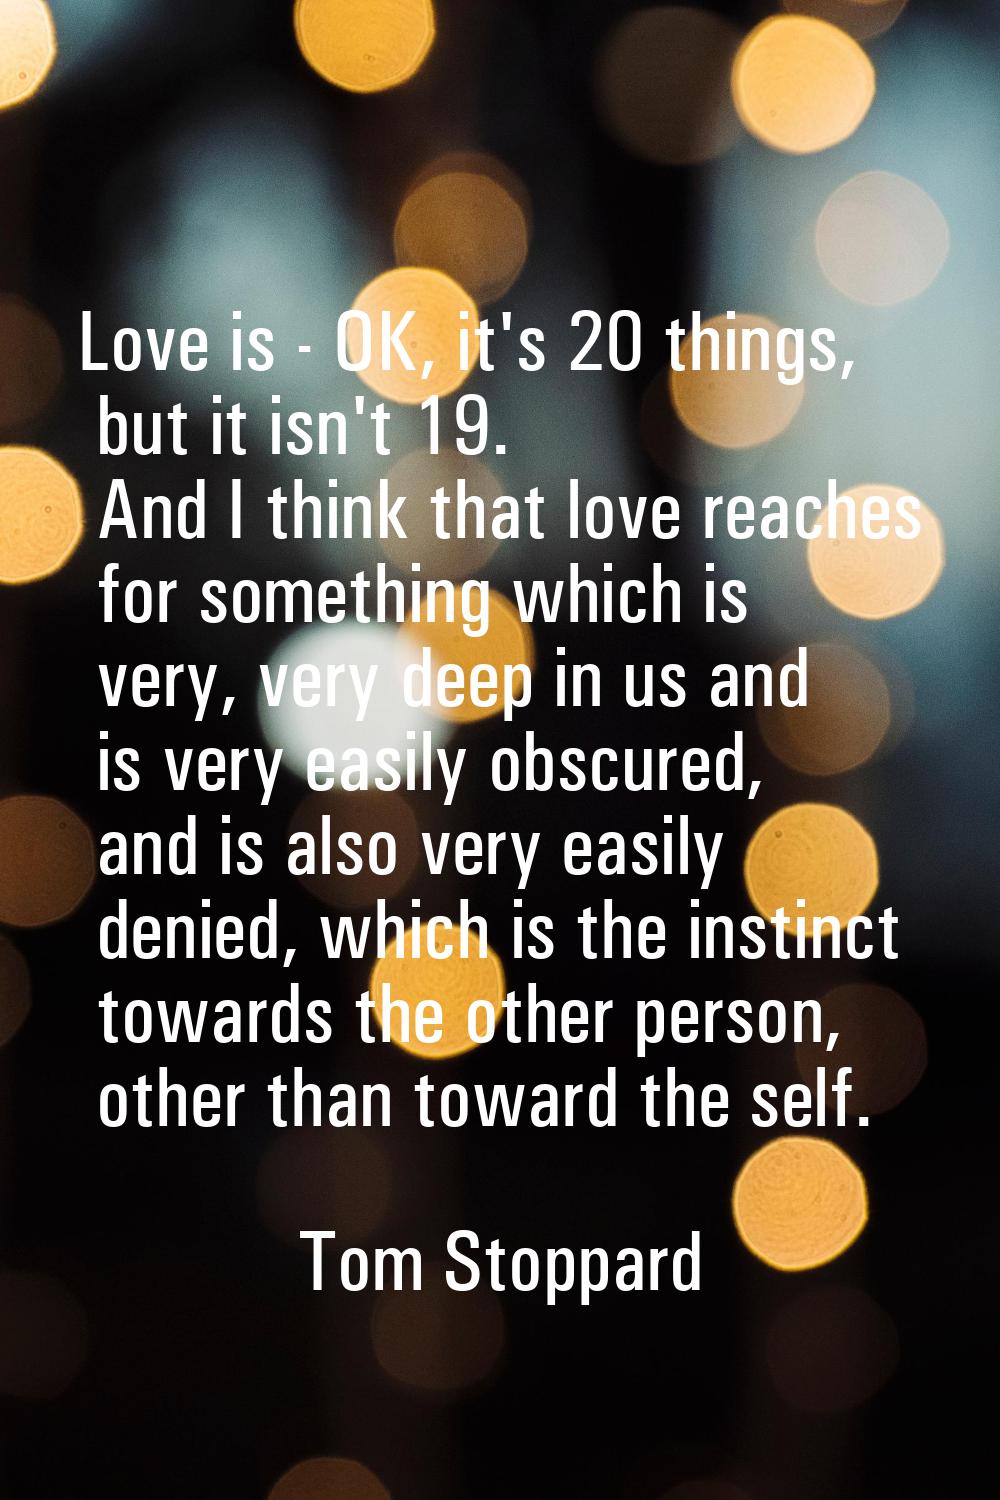 Love is - OK, it's 20 things, but it isn't 19. And I think that love reaches for something which is